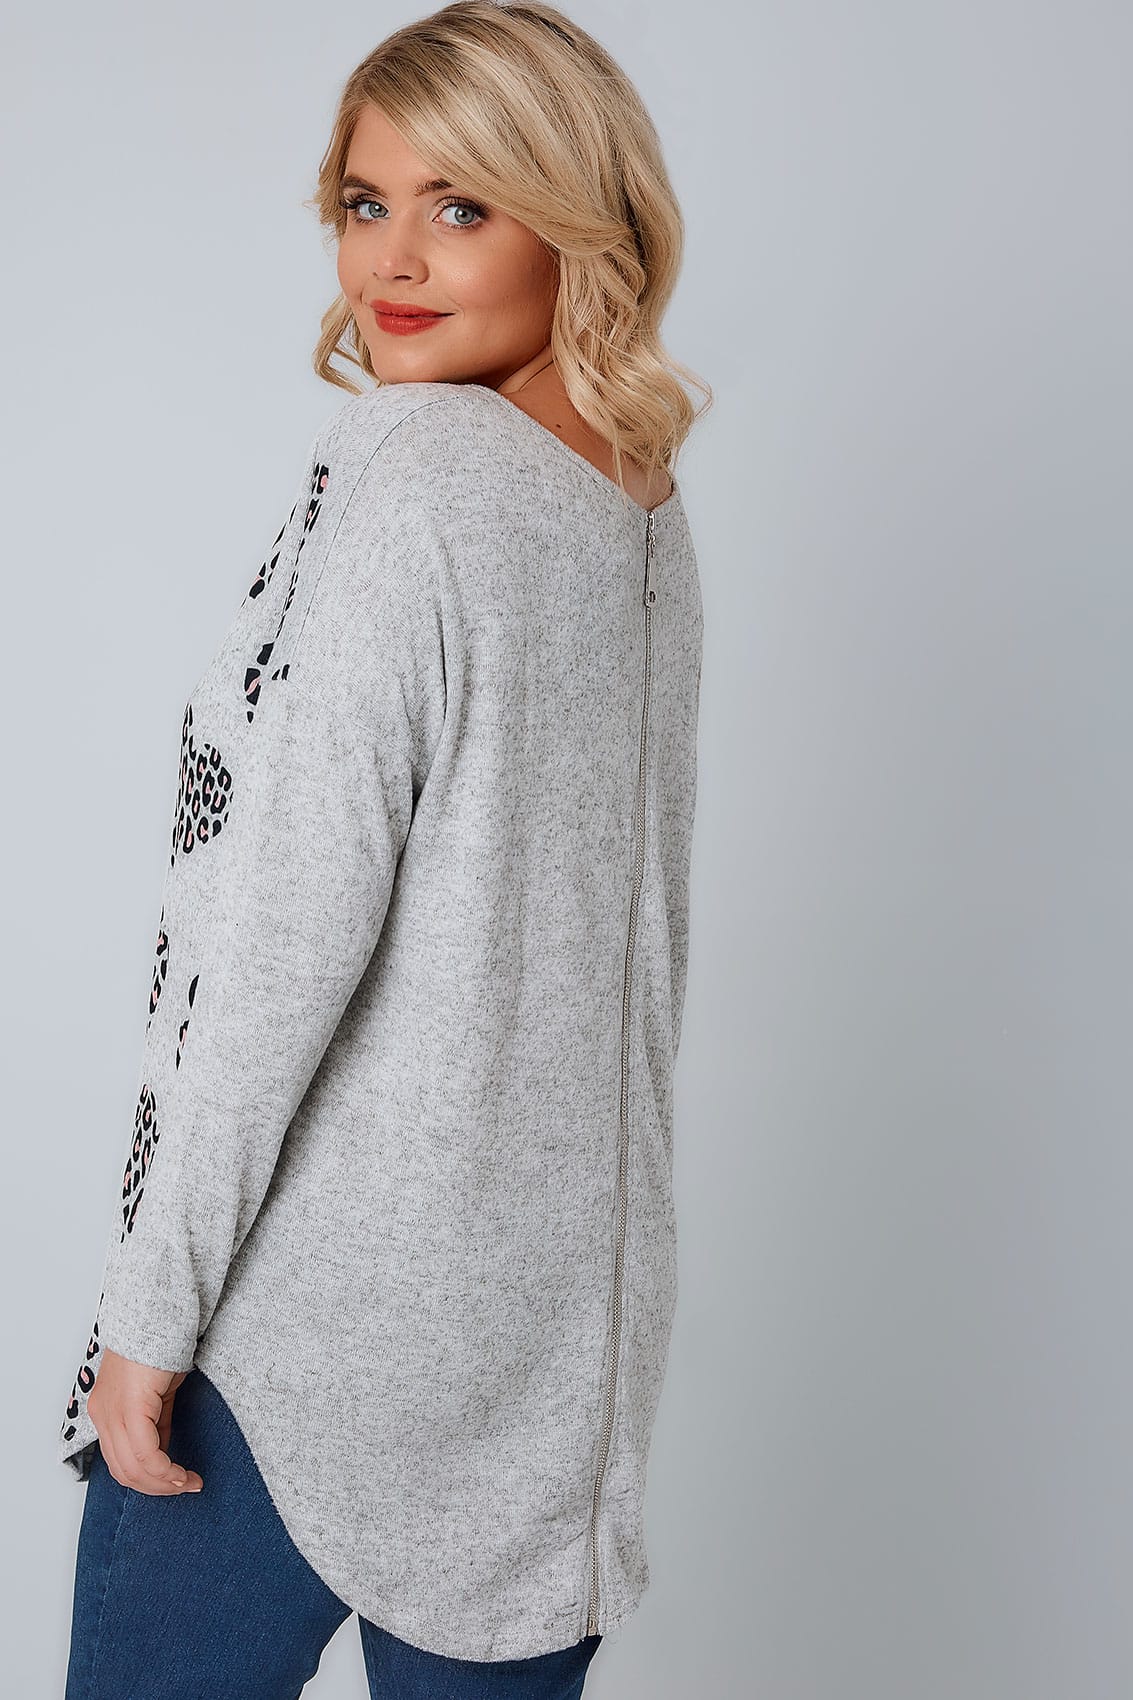 Grey Animal Heart Print Brushed Fine Knit Top With a Zip Up Back, Plus ...